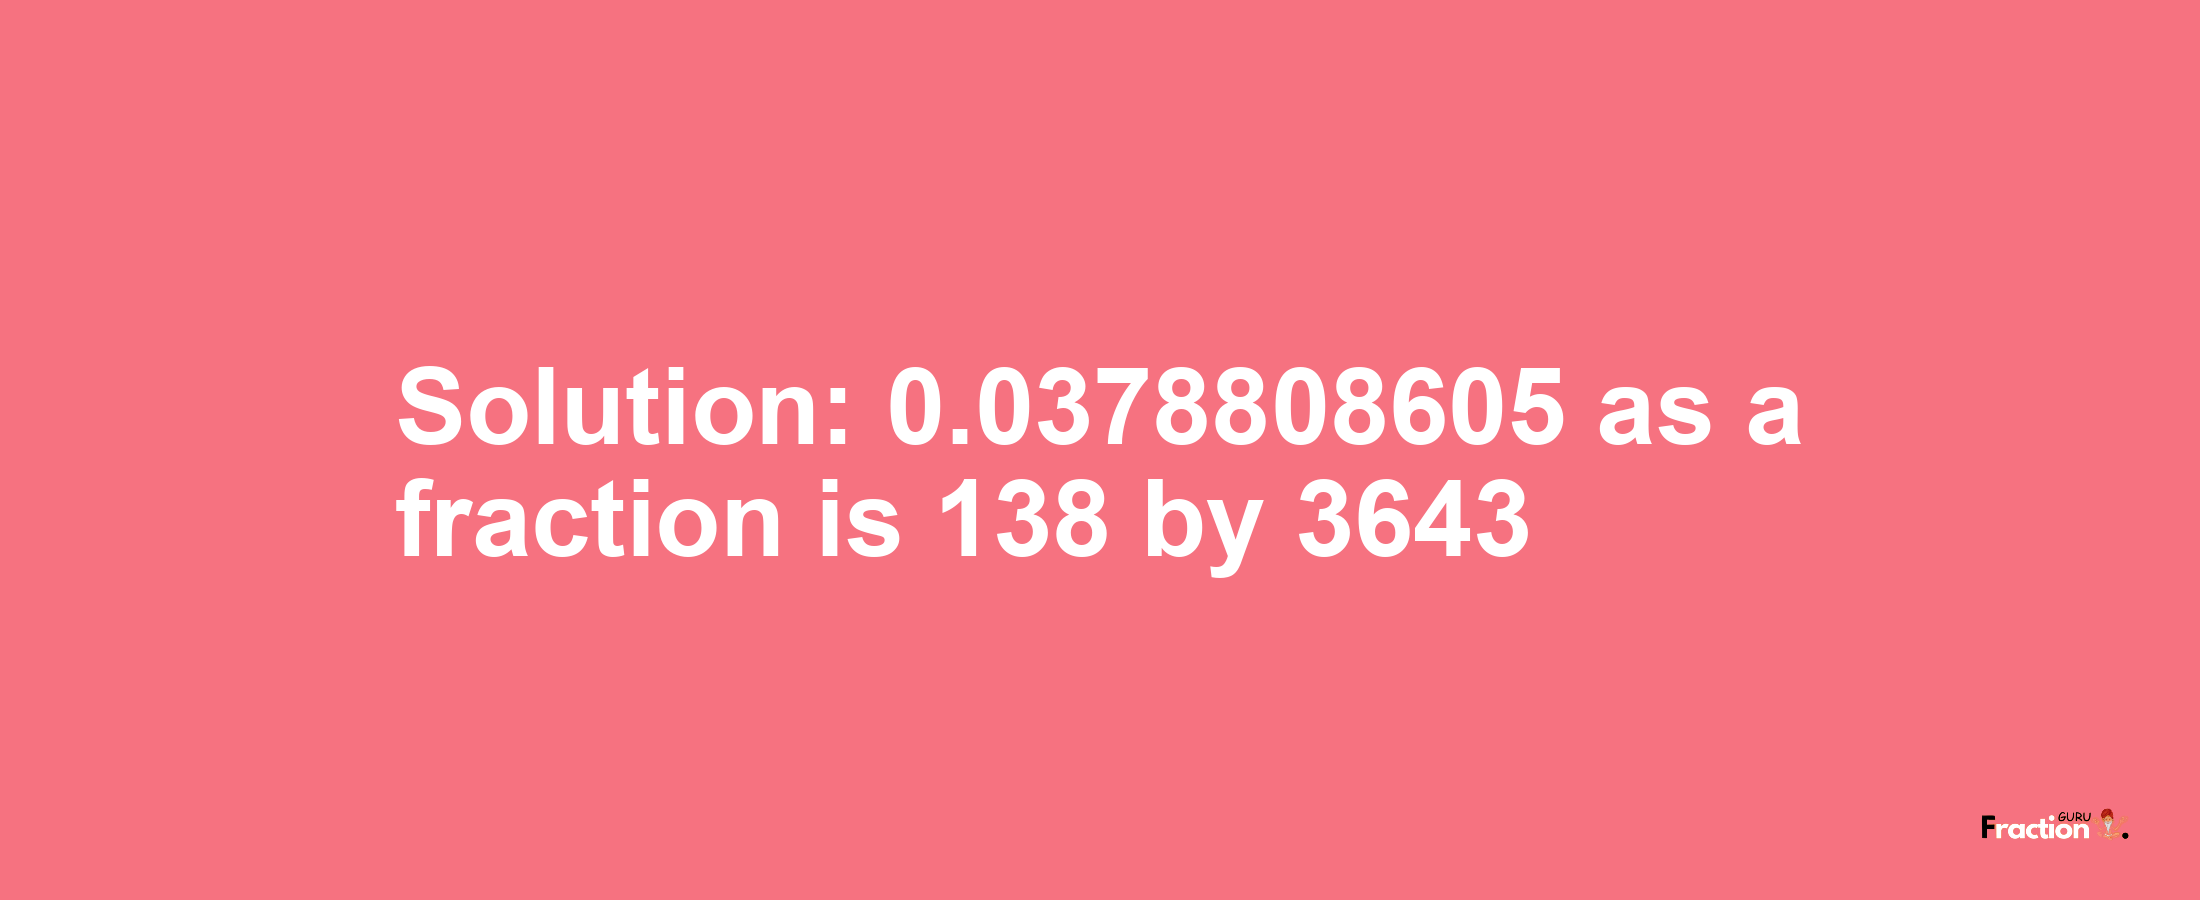 Solution:0.0378808605 as a fraction is 138/3643